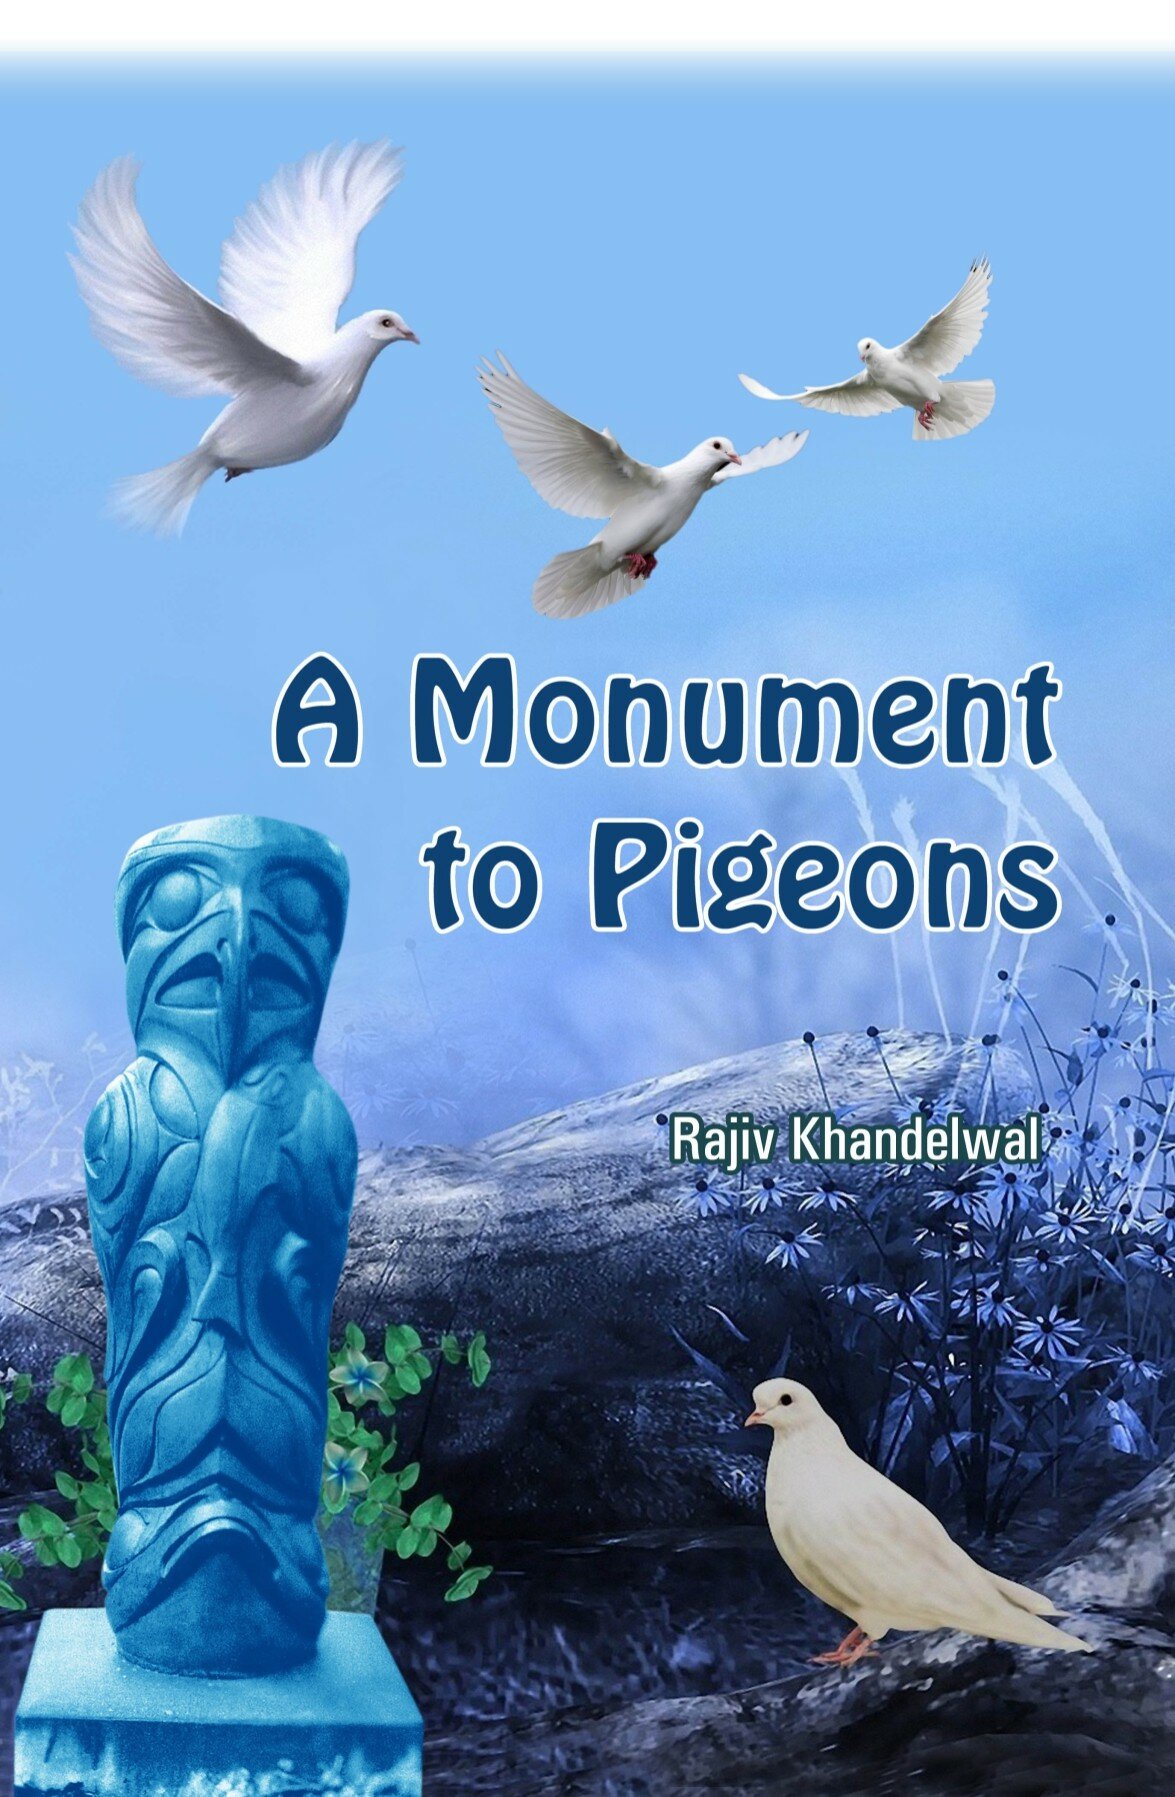 A Monument to Pigeons